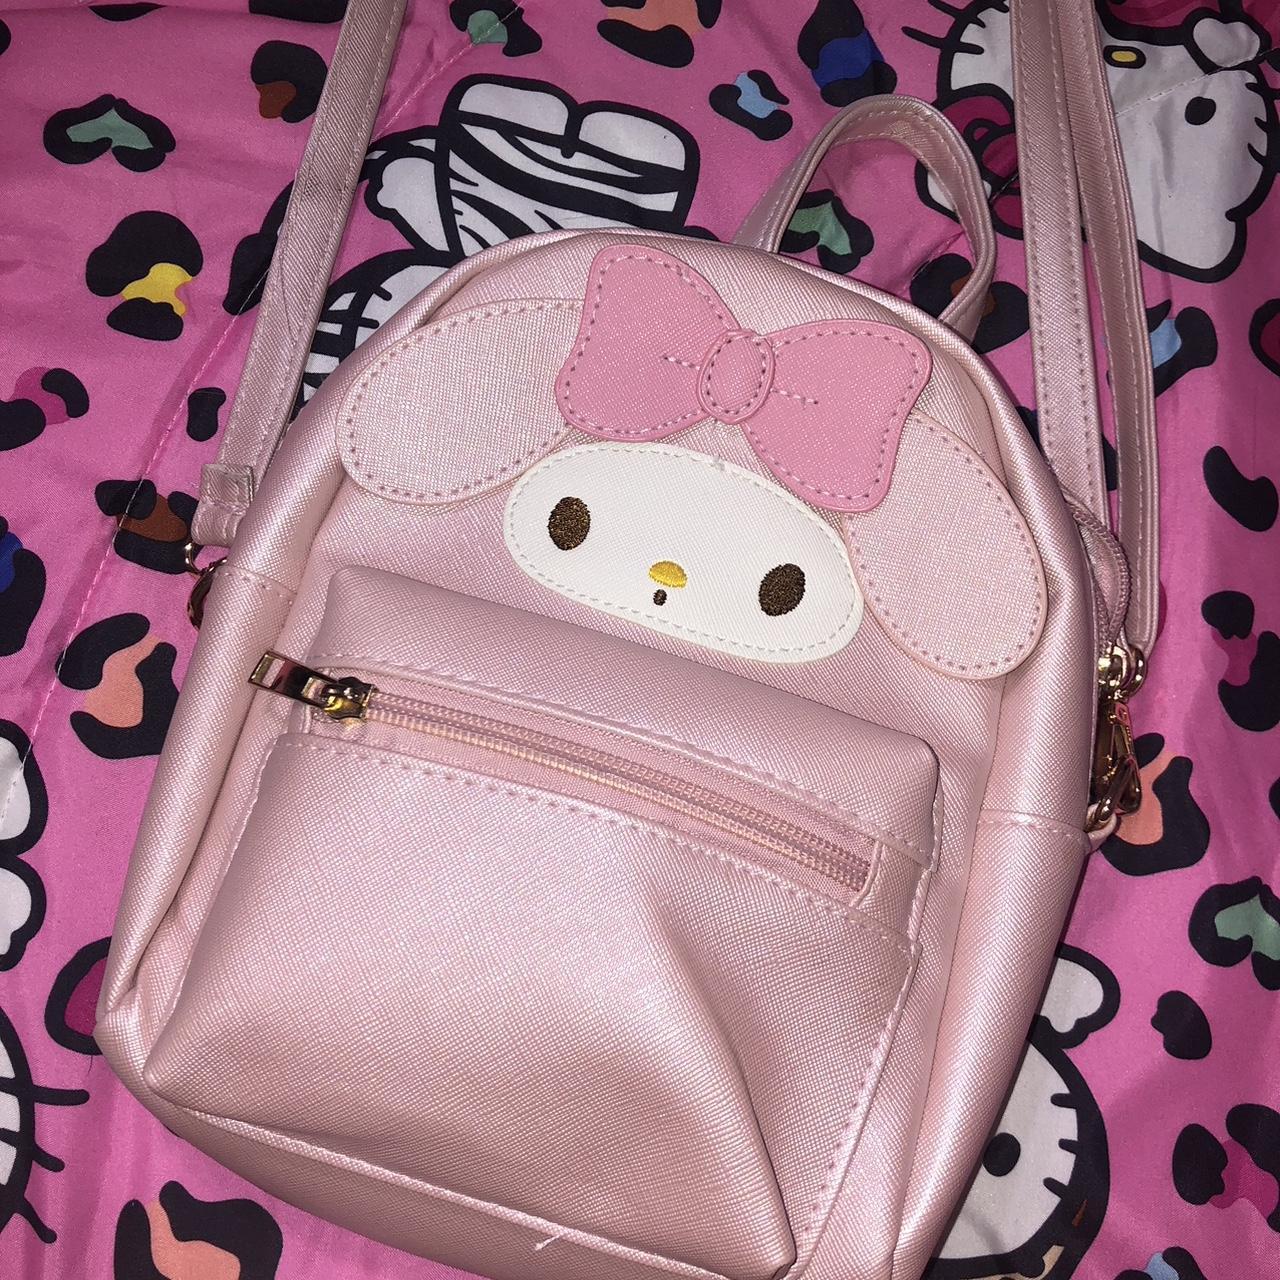 Sanrio Women's Pink and White Bag